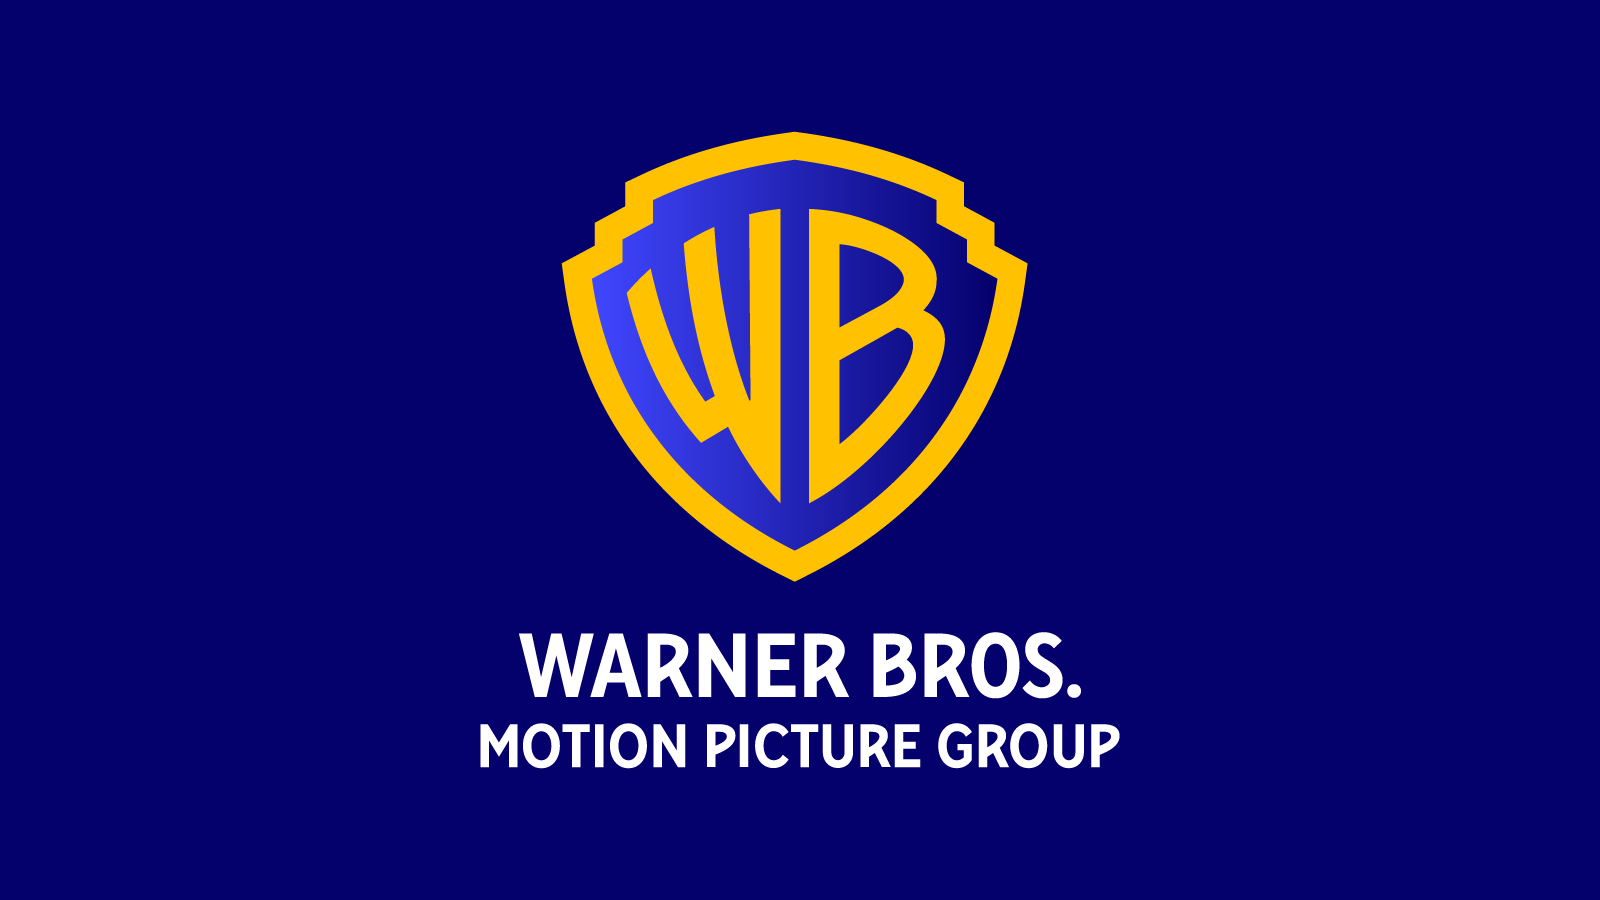 Warner Bros. Motion Picture Group And Tom Cruise To Jointly Develop And Produce Original And